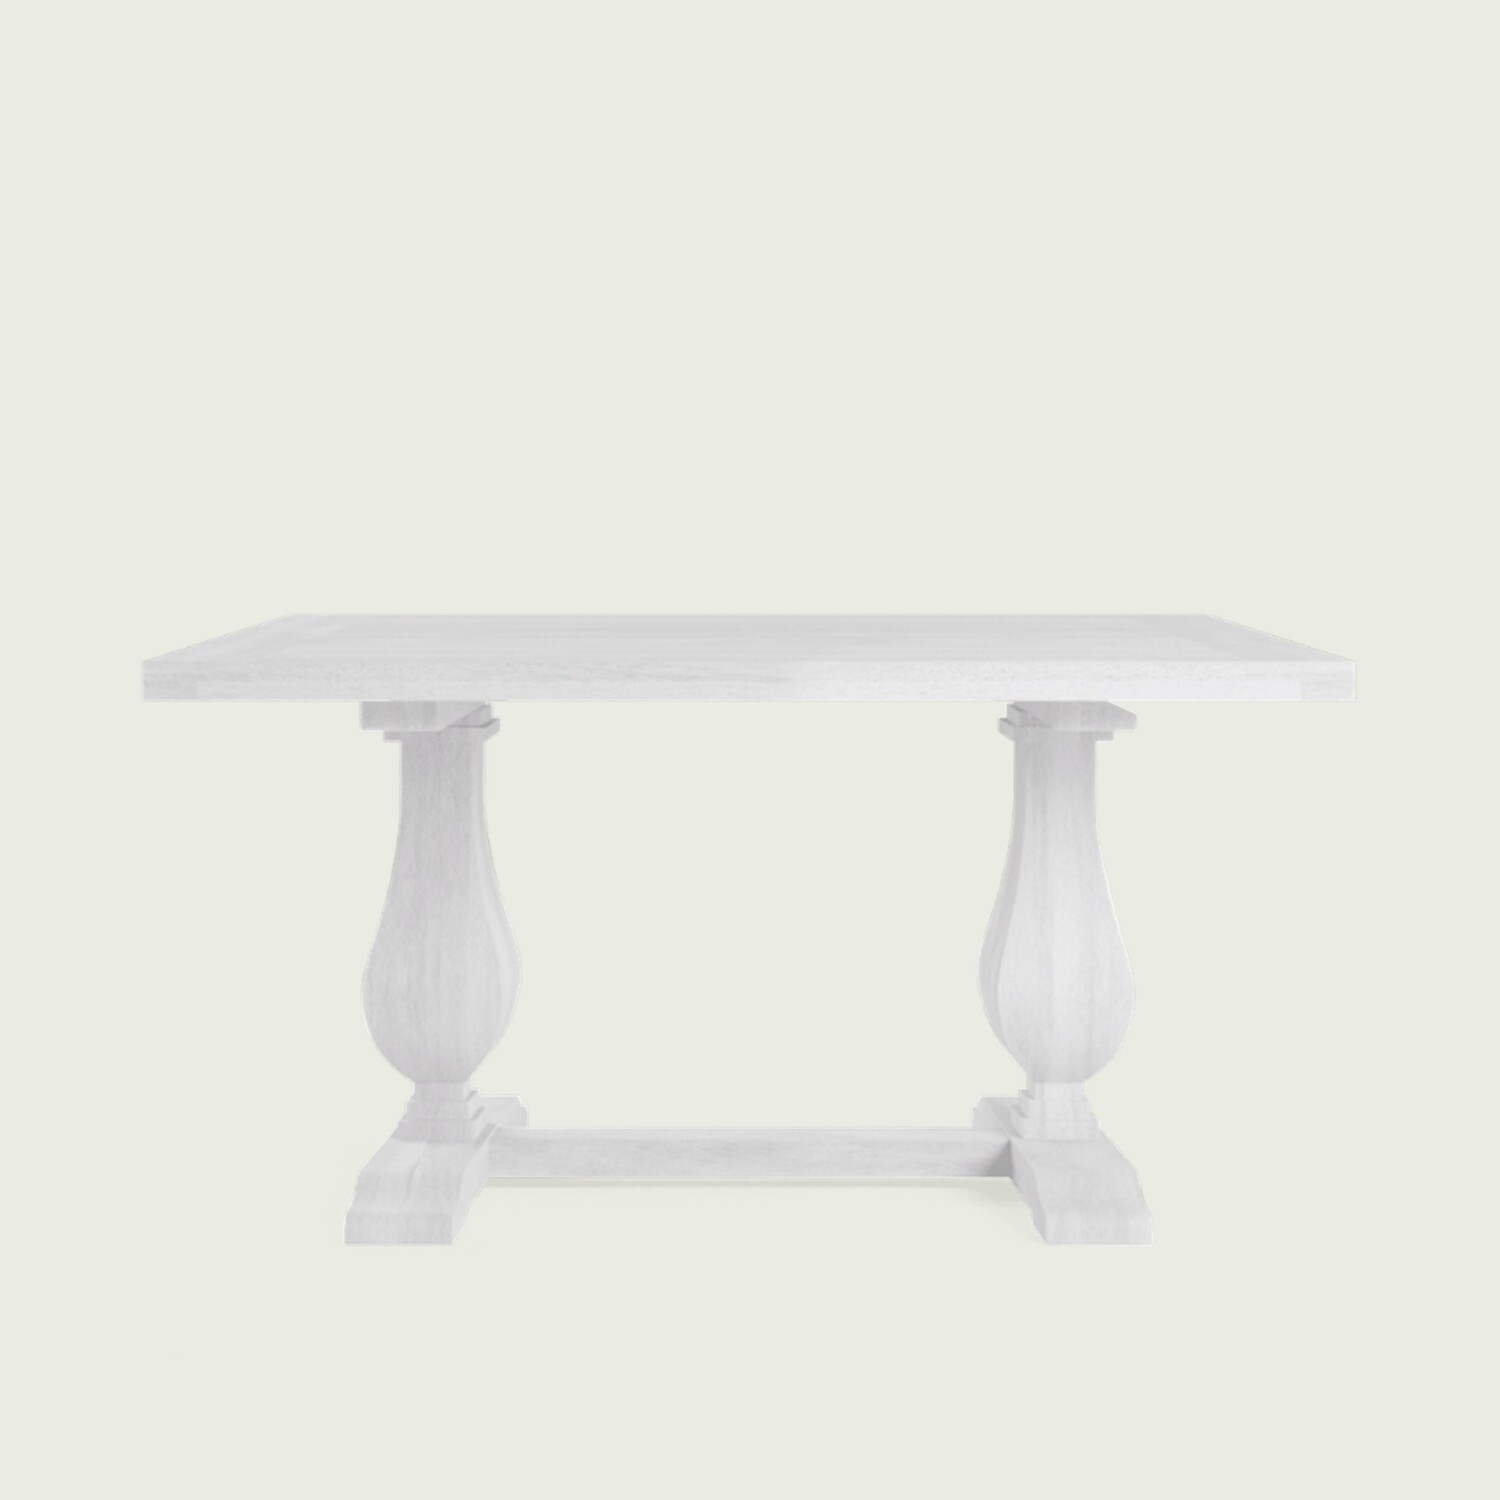 Derbyshire Distressed White Luxury Dining Table - 4, 6 and 8 Seater/All Sizes